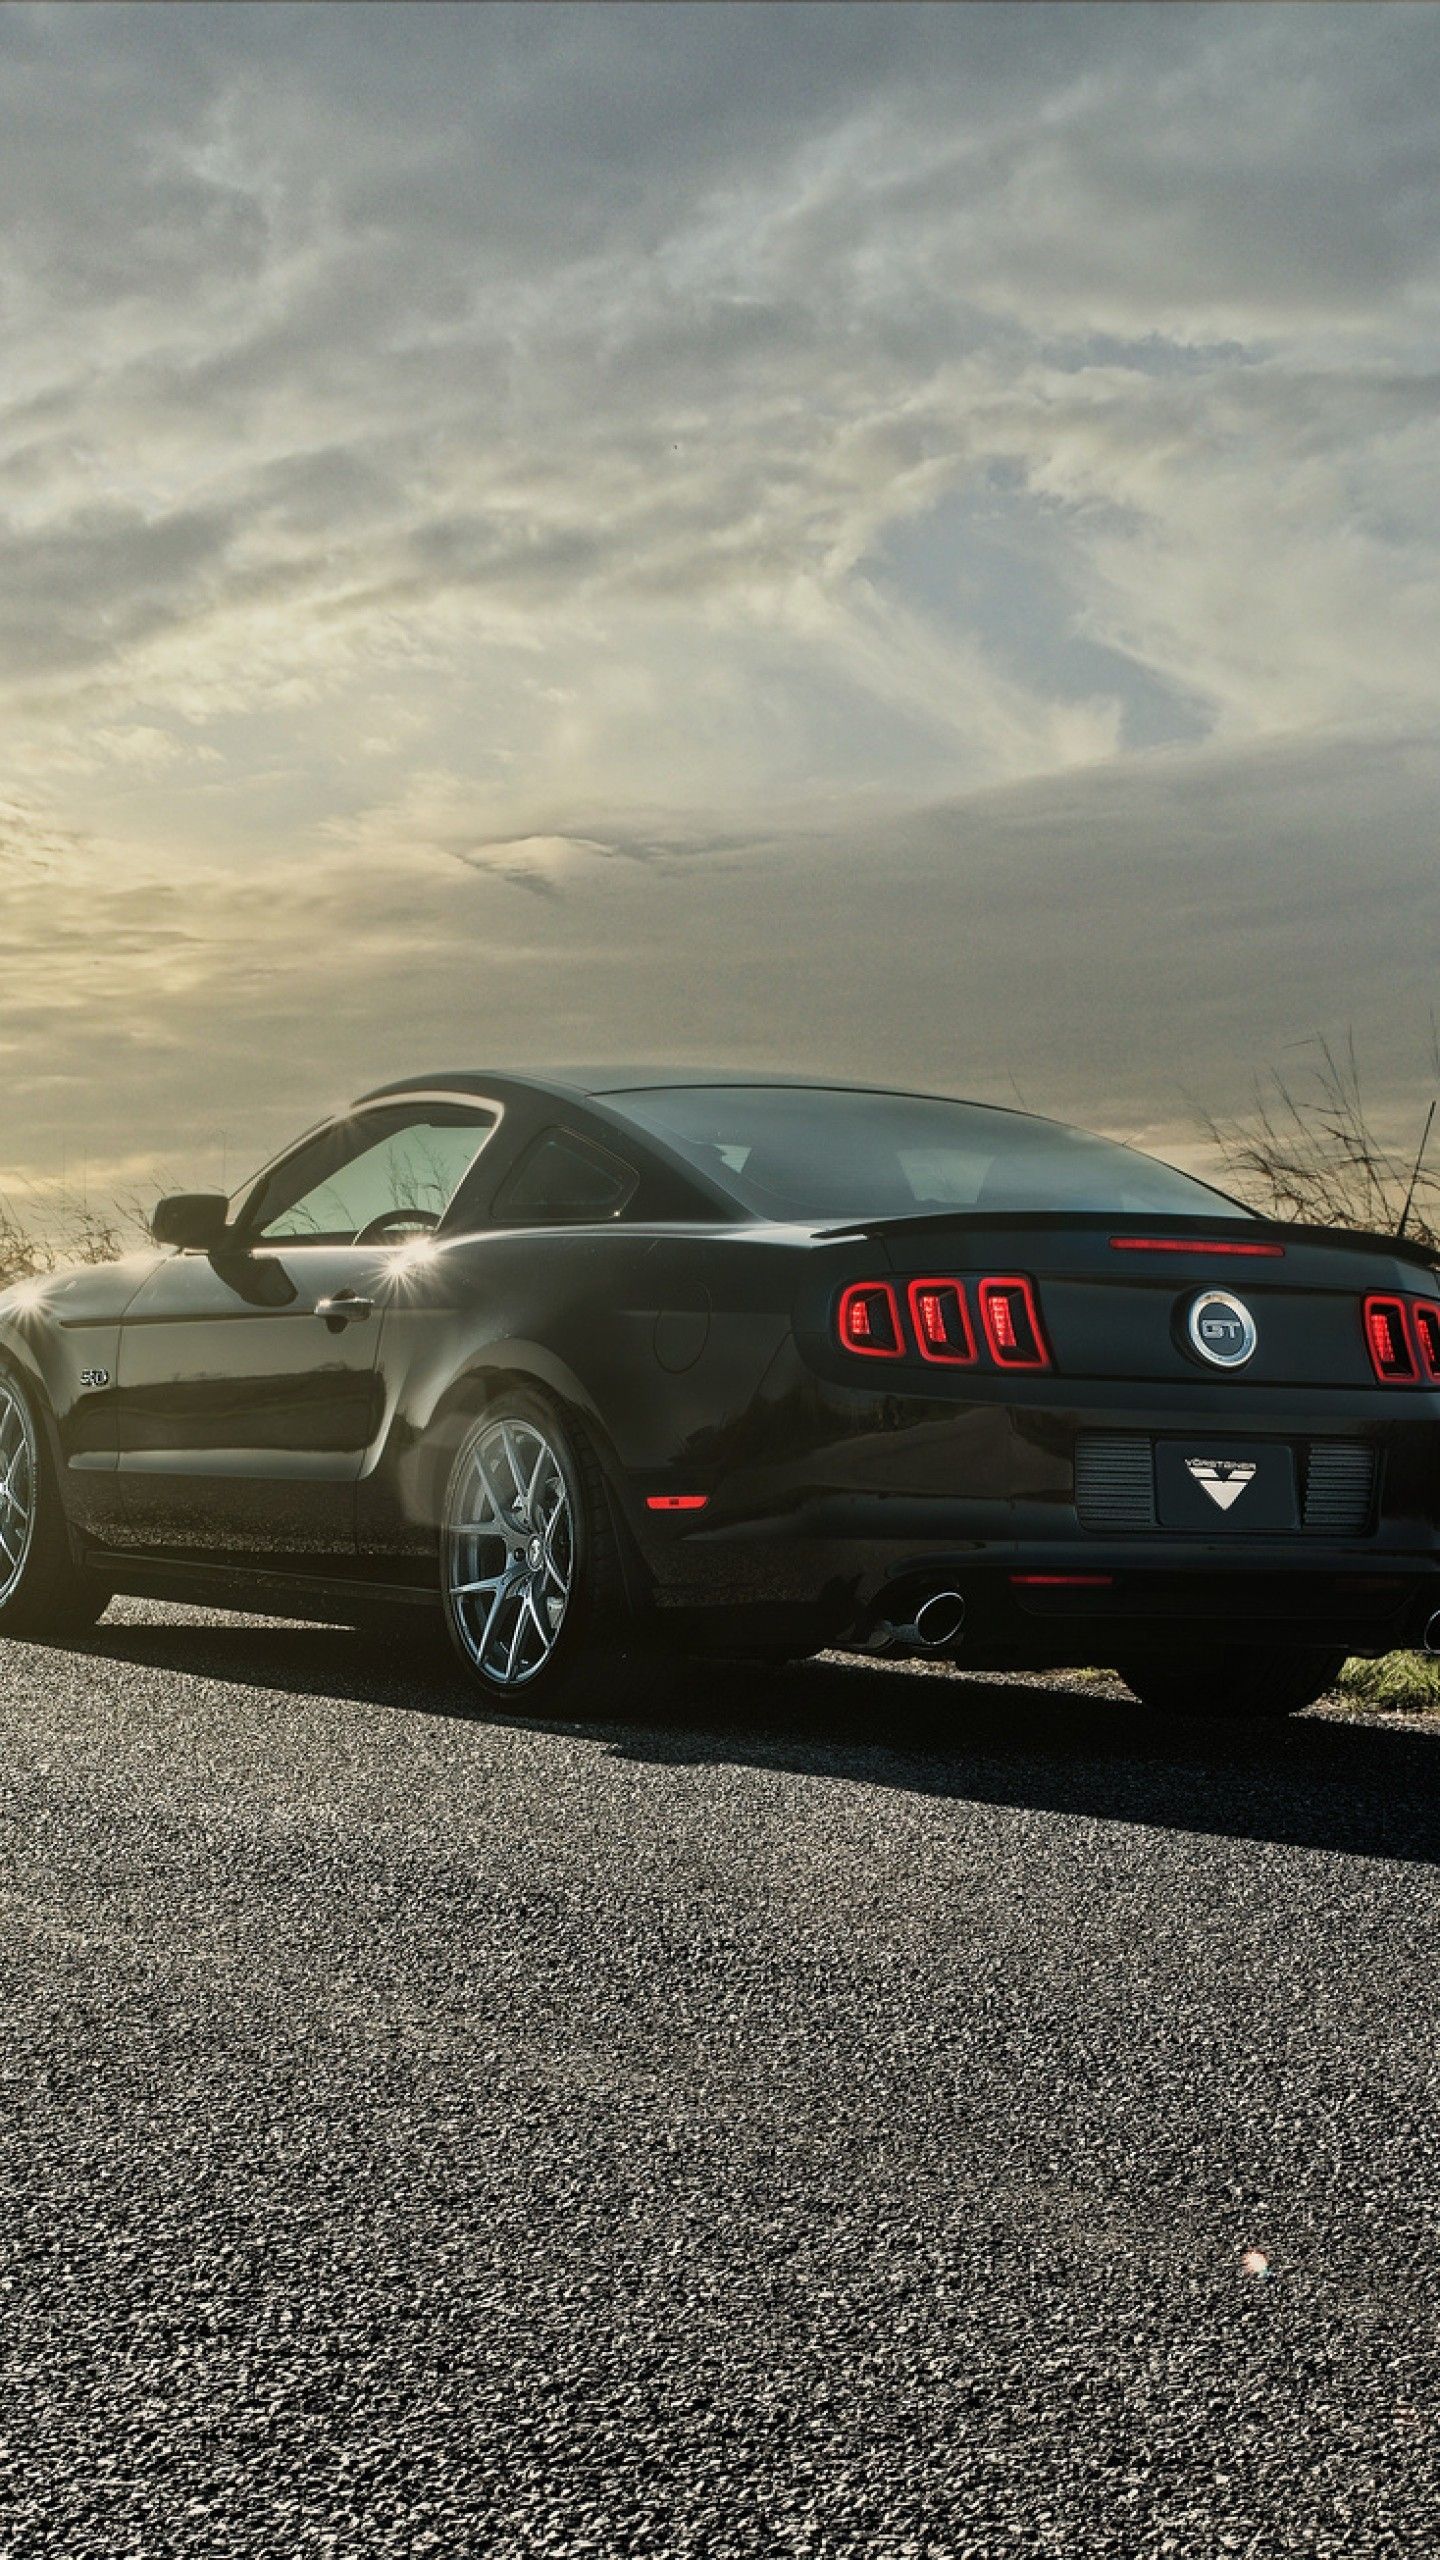 Topic For Black Ford Mustang Wallpaper, Eleanor Mustang Wallpaper 71 Background Picture Black Ford Wallpaper. Red Black. Tumblr